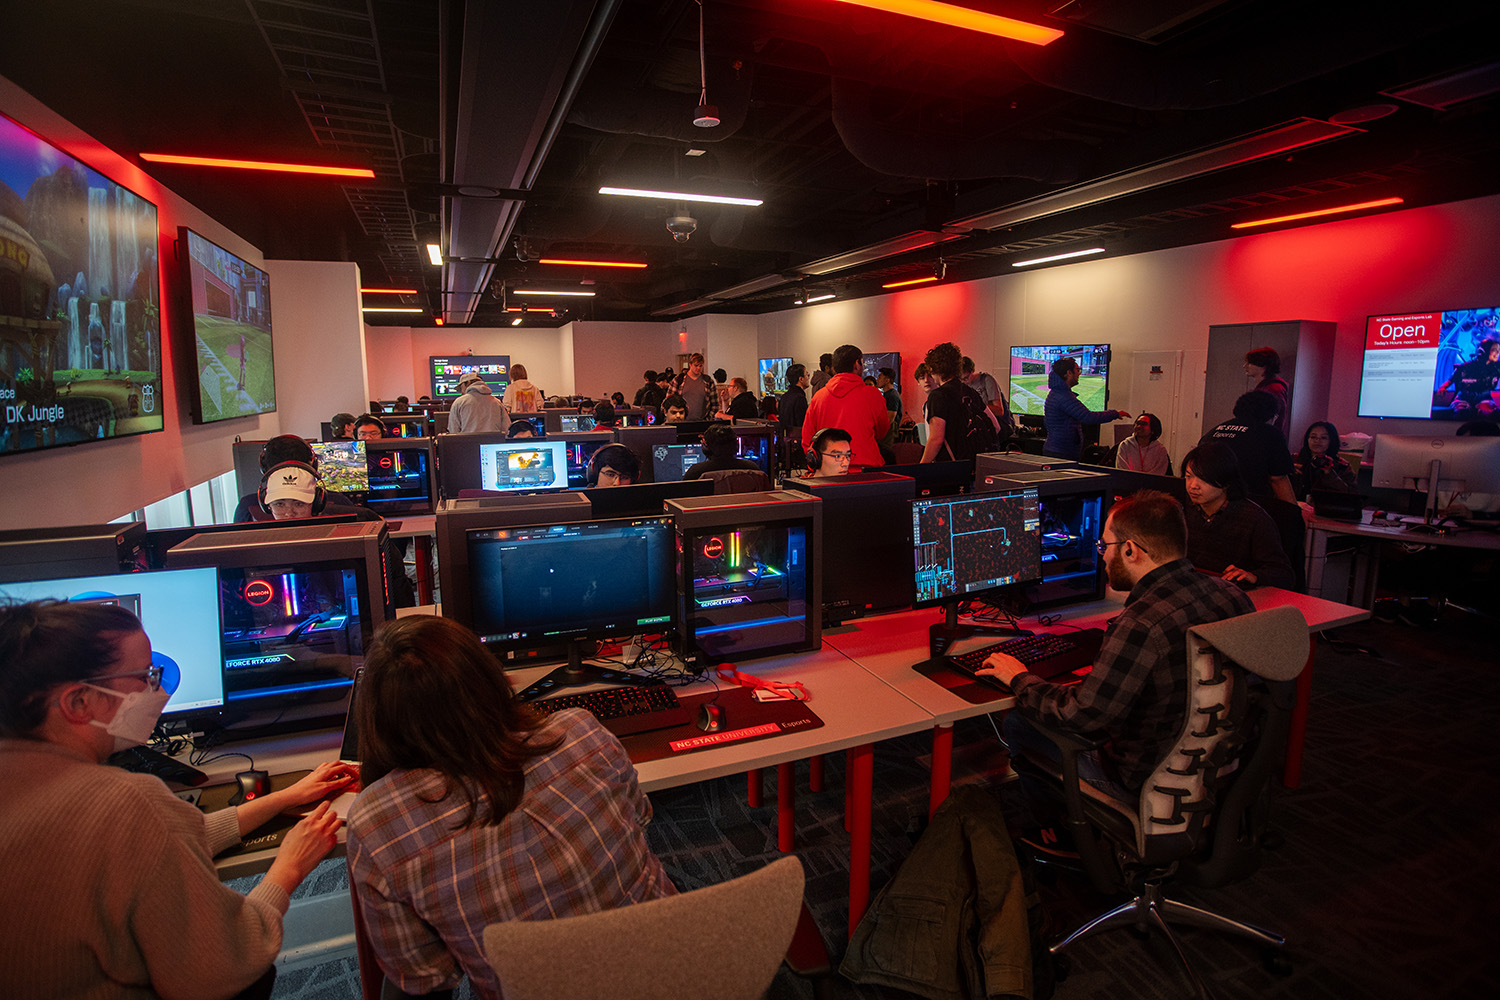 The Gaming and Esports Lab at the Hunt Library